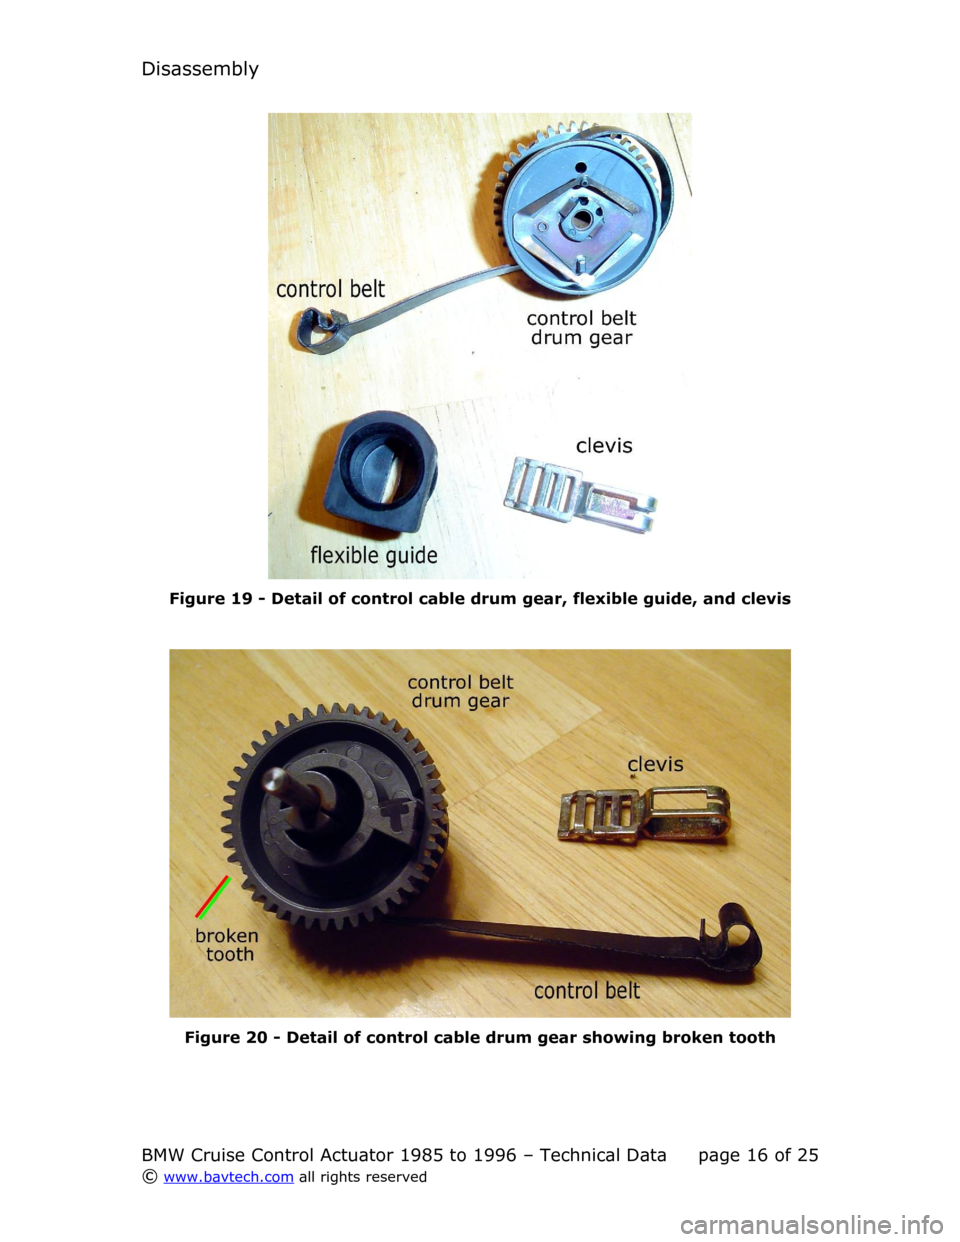 BMW 7 SERIES 1988 E32 Cruise Control Acutator Disassembly
Figure  19  - Detail of control cable drum gear, flexible guide, and clevis
Figure  20  - Detail of control cable drum gear showing broken tooth
BMW Cruise Control Actuator 1985 to 1996 �